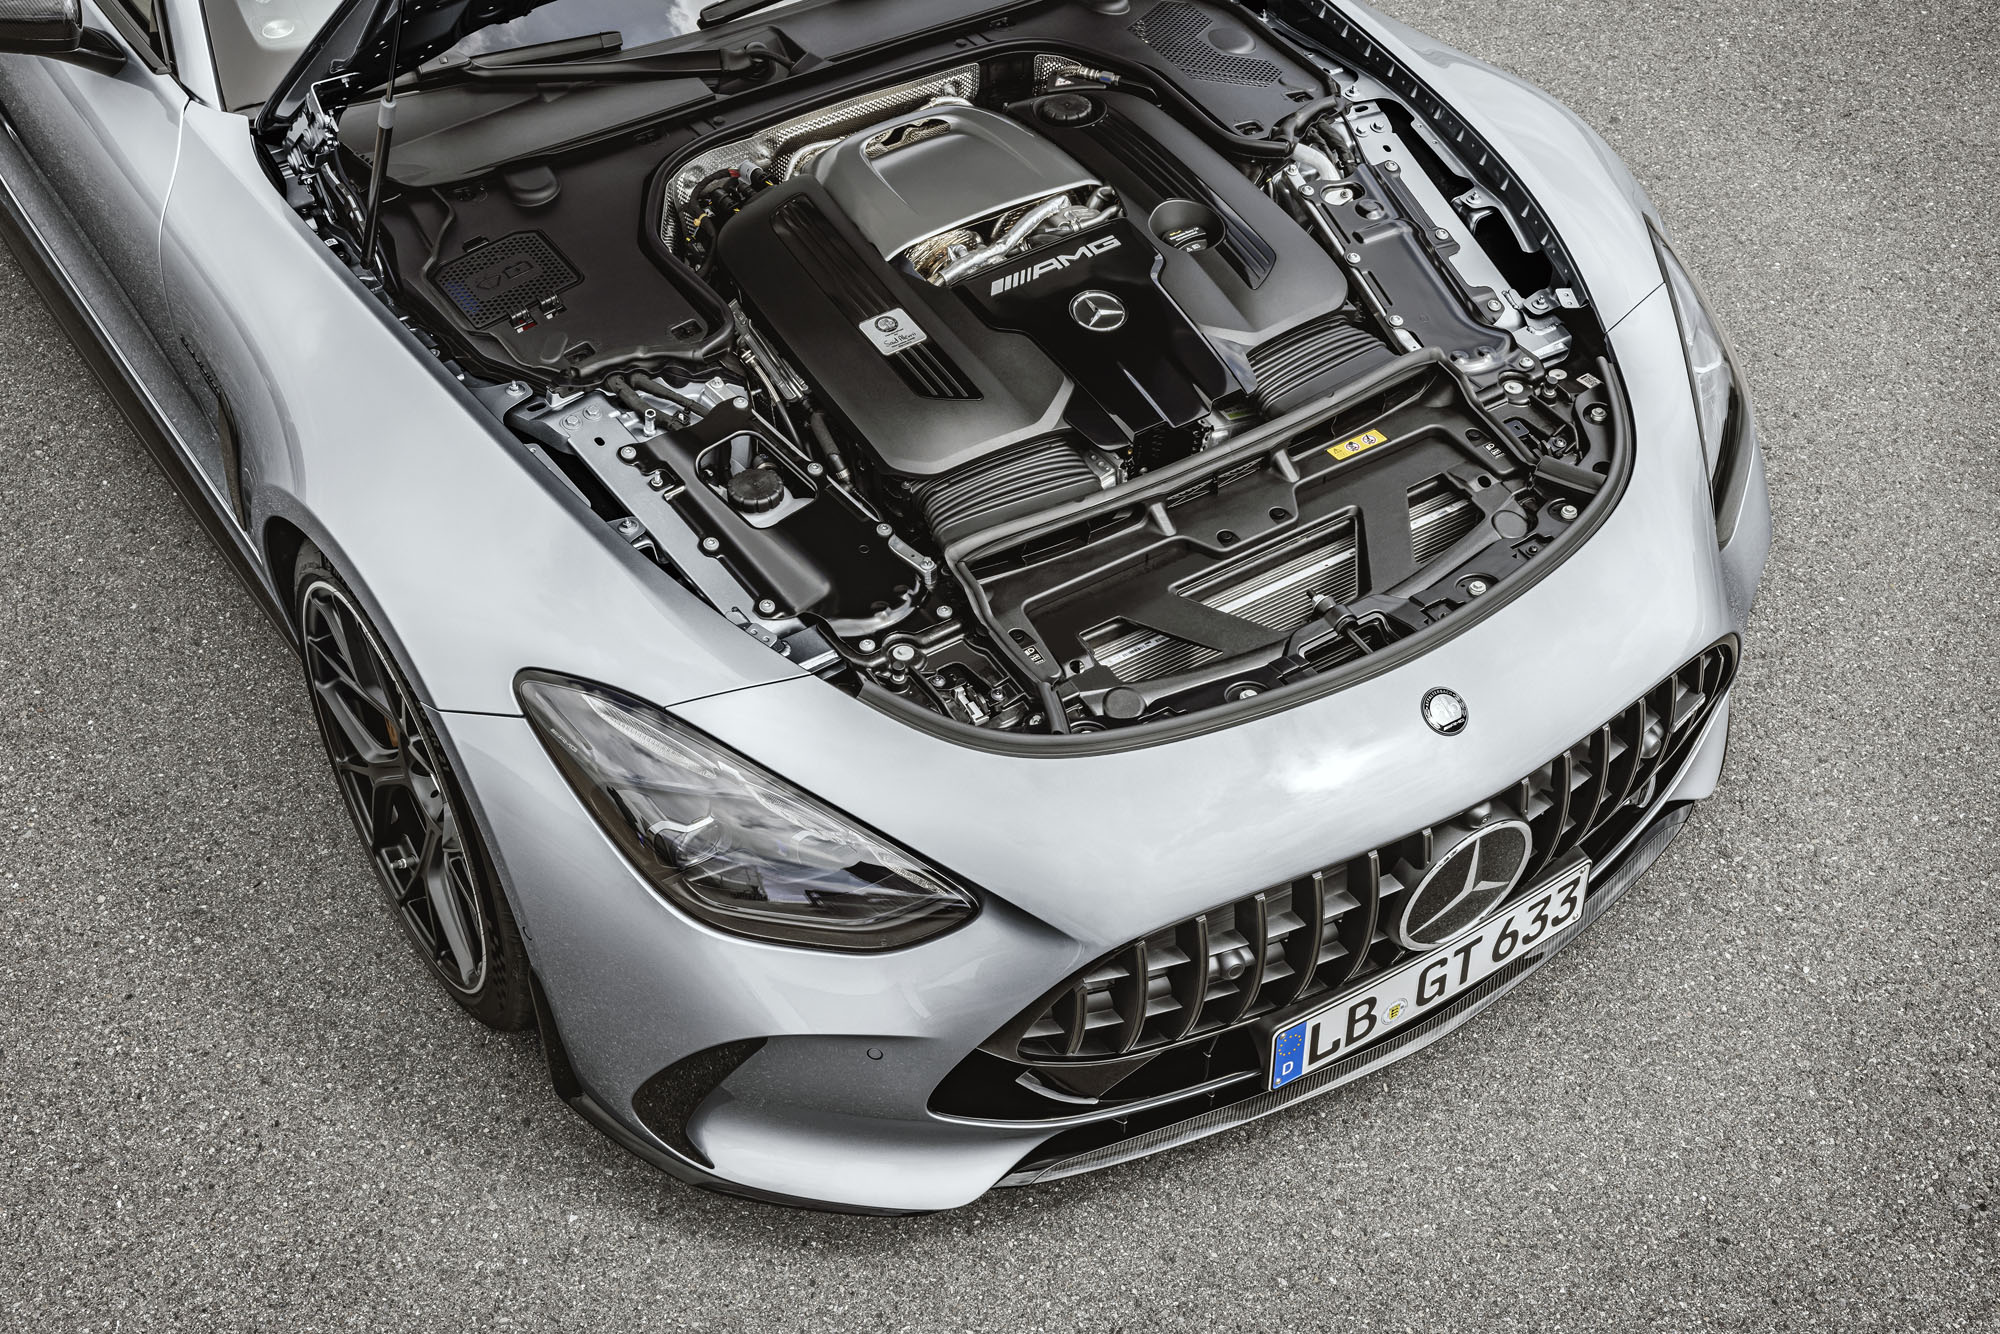 mercedes-amg, mercedes-amg gt, mercedes-benz, next-generation mercedes-amg gt revealed – the v8 is alive and well